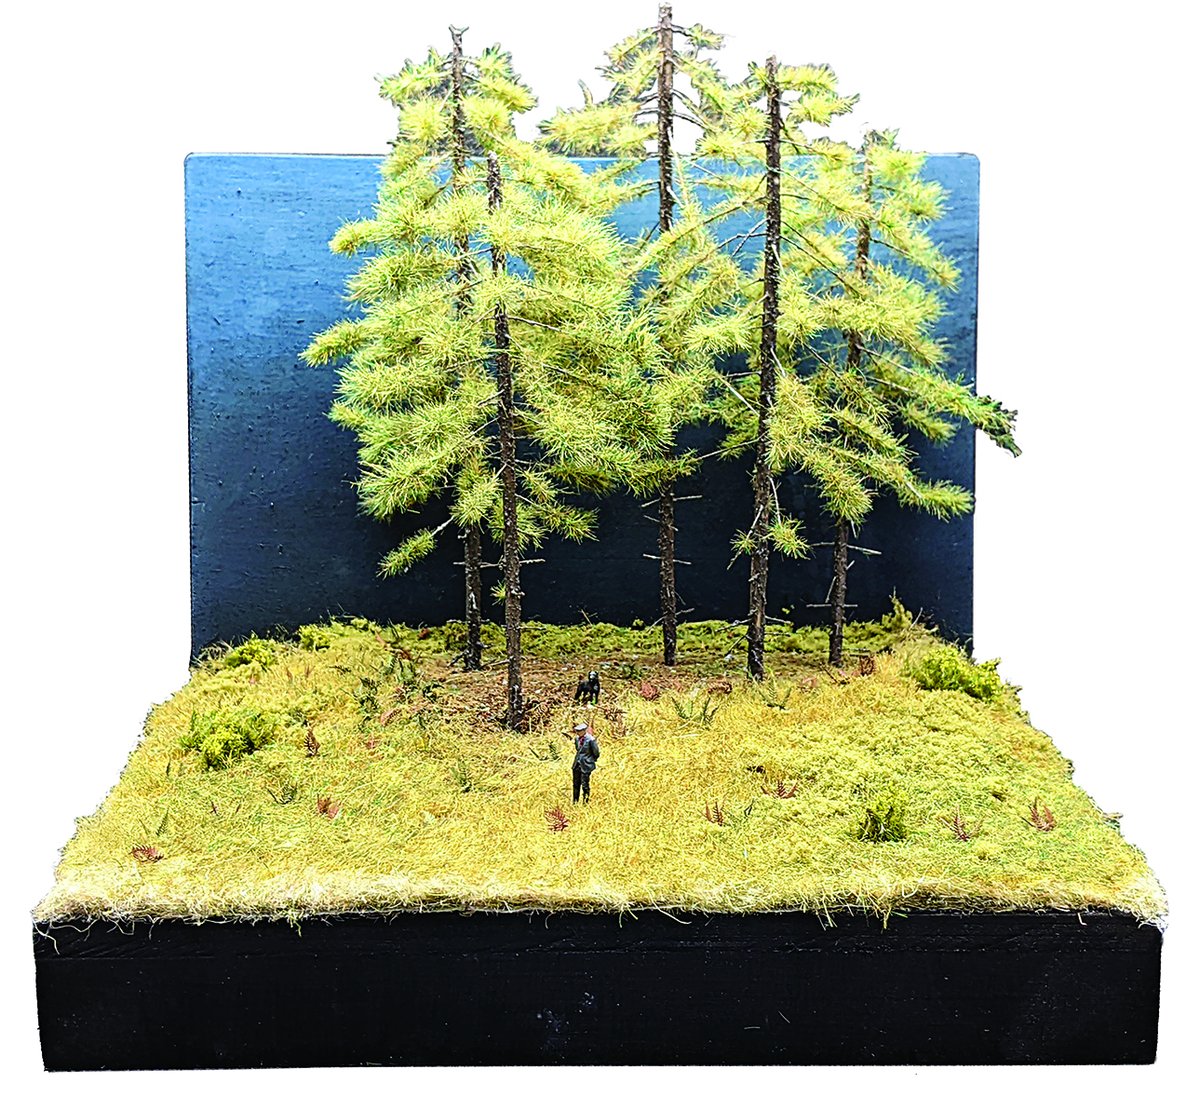 Model trees are readily available, but Dan Evason looked for a budget option by making his own, as he demonstrates in his latest modelling guide. Read it online here: hubs.ly/Q02rZhG00 #keymodelworld #hornbymagazine #modelrailways